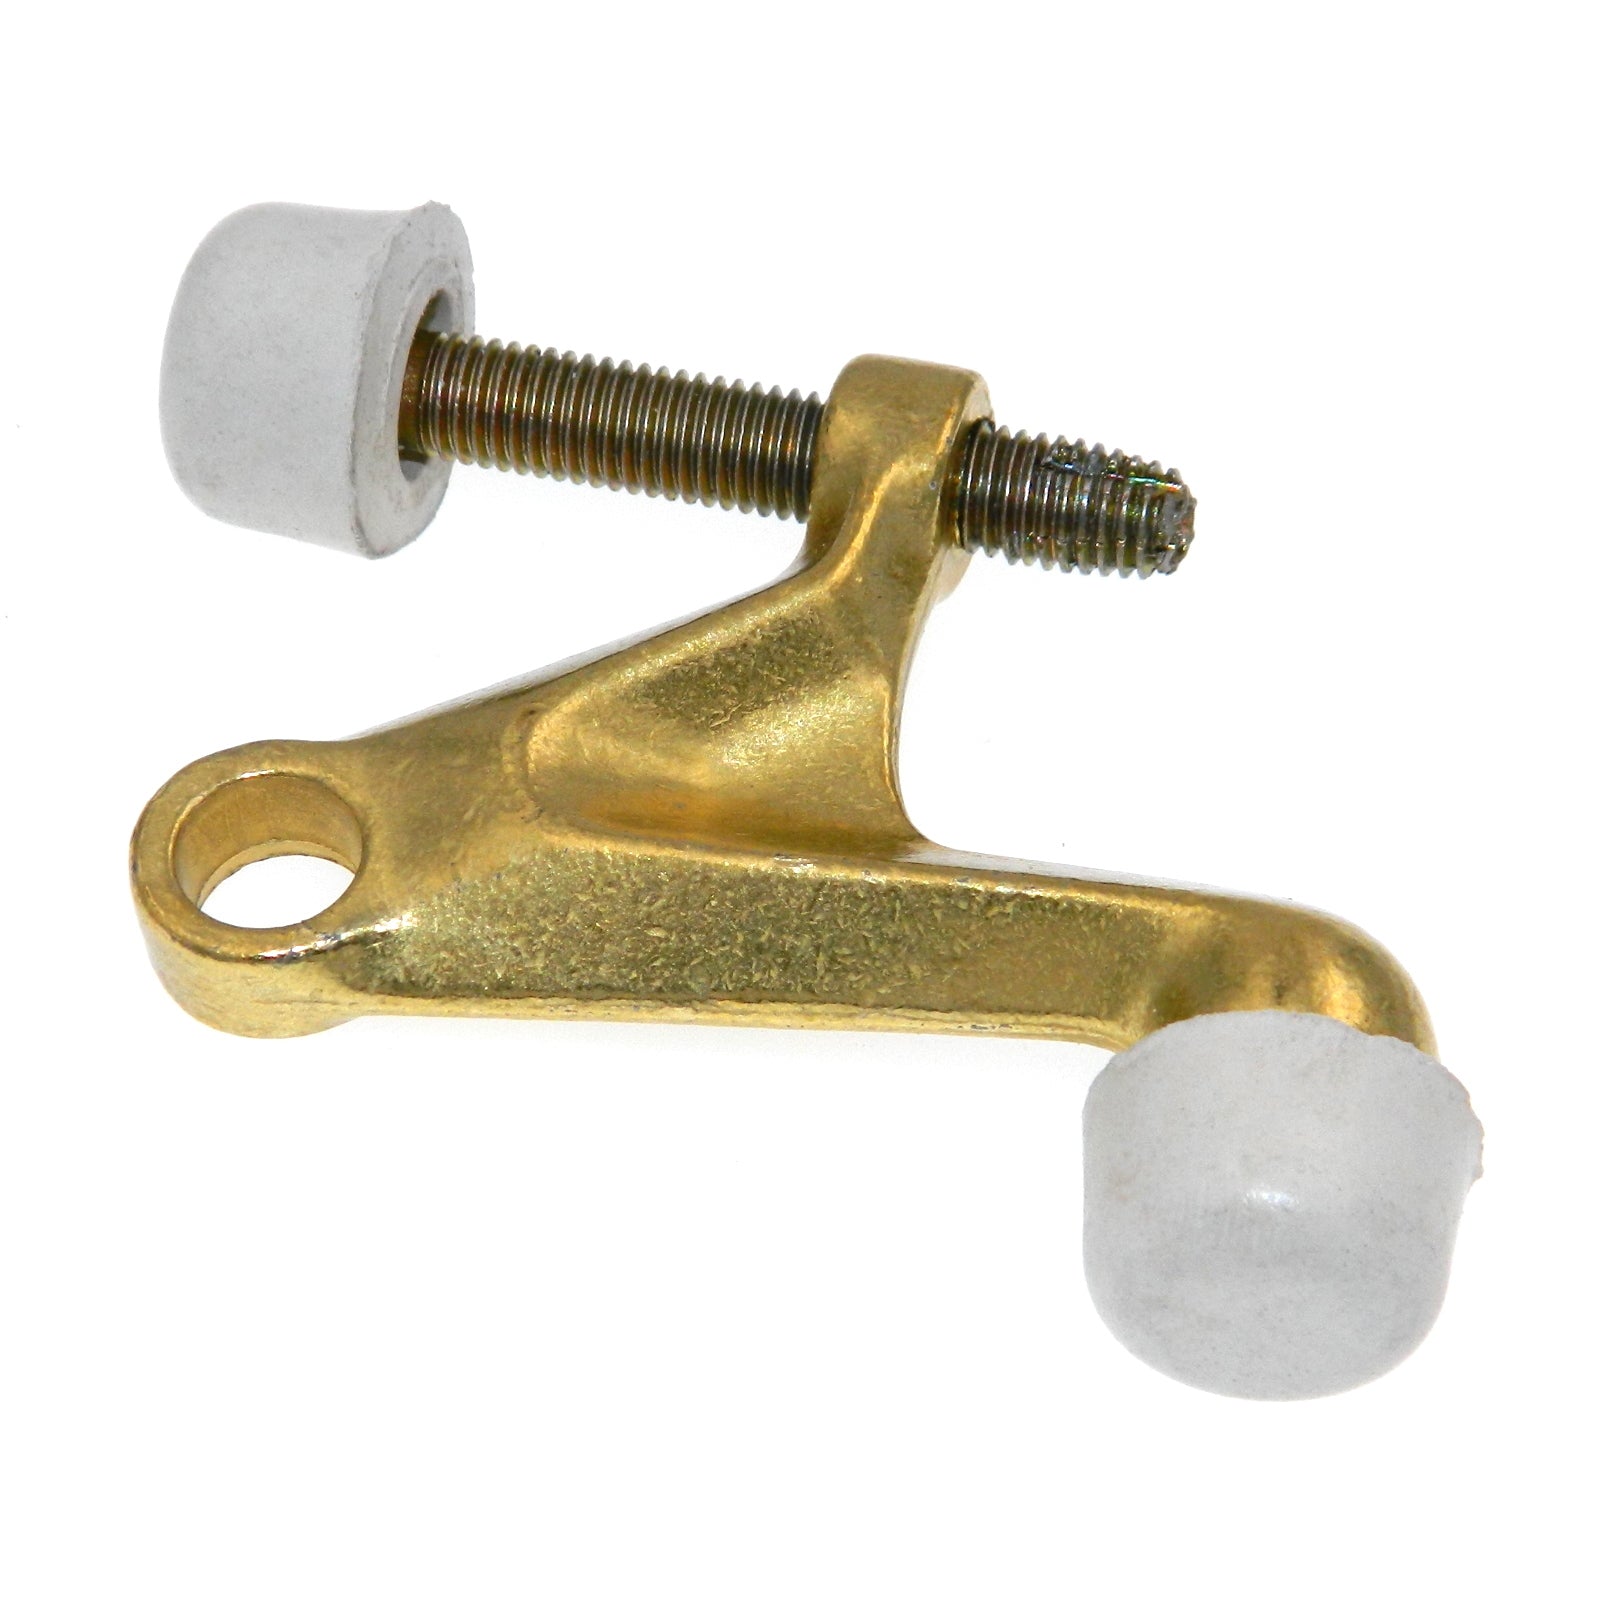 Amerock BP2256-3 Polished Brass Heavy Duty Hinge Pin Doorstop with Rubber Tips